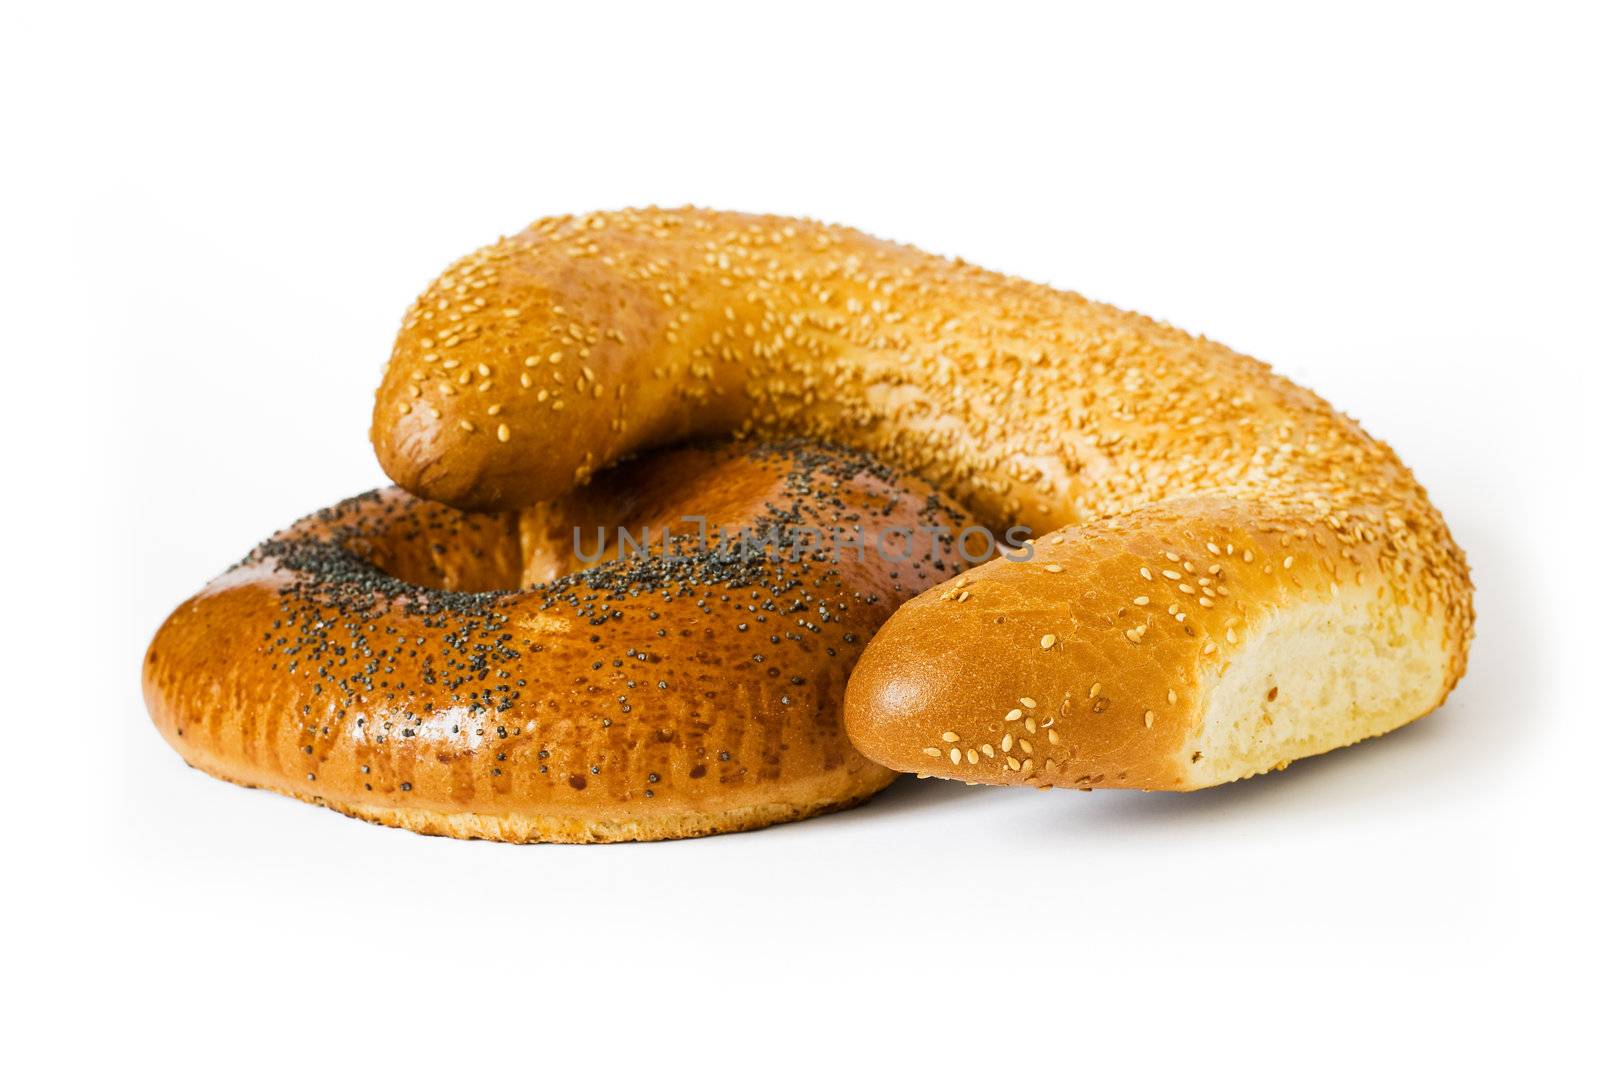 Isolated white bread with poppy and sesame seeds. Objects with shadow on white background. Clipping path included to remove object shadow or replace background.